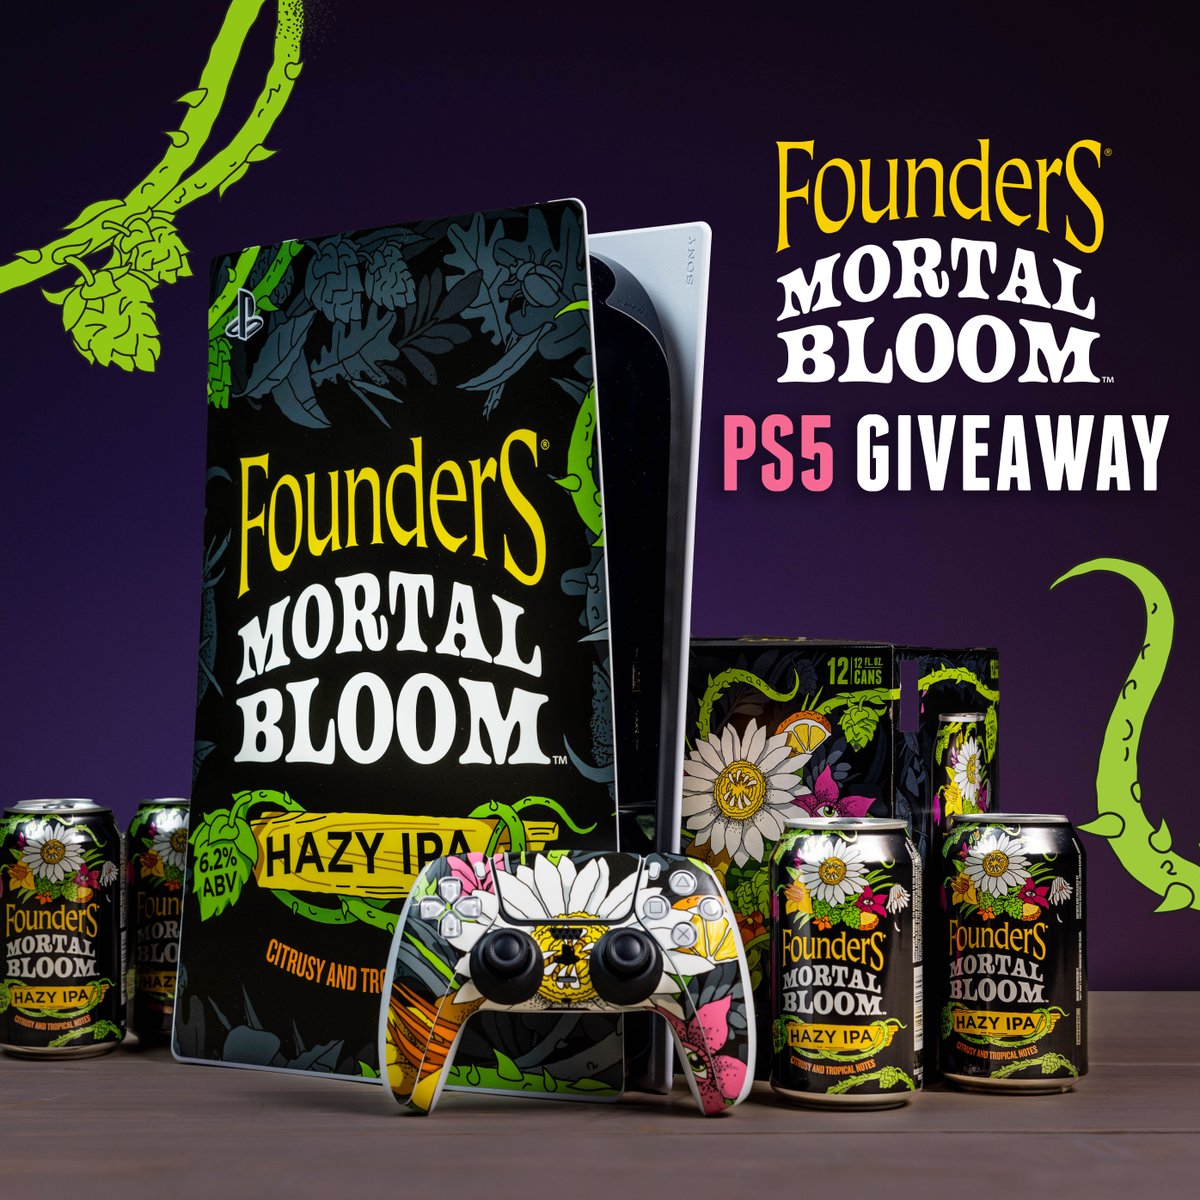 Mortal Bloom keeps life vibrant. To celebrate this delicious new beer we are giving you the chance to win a Mortal Bloom wrapped PlayStation 5! To enter, like, follow and tag a friend who keeps your life colorful! #MortalBloomGiveaway